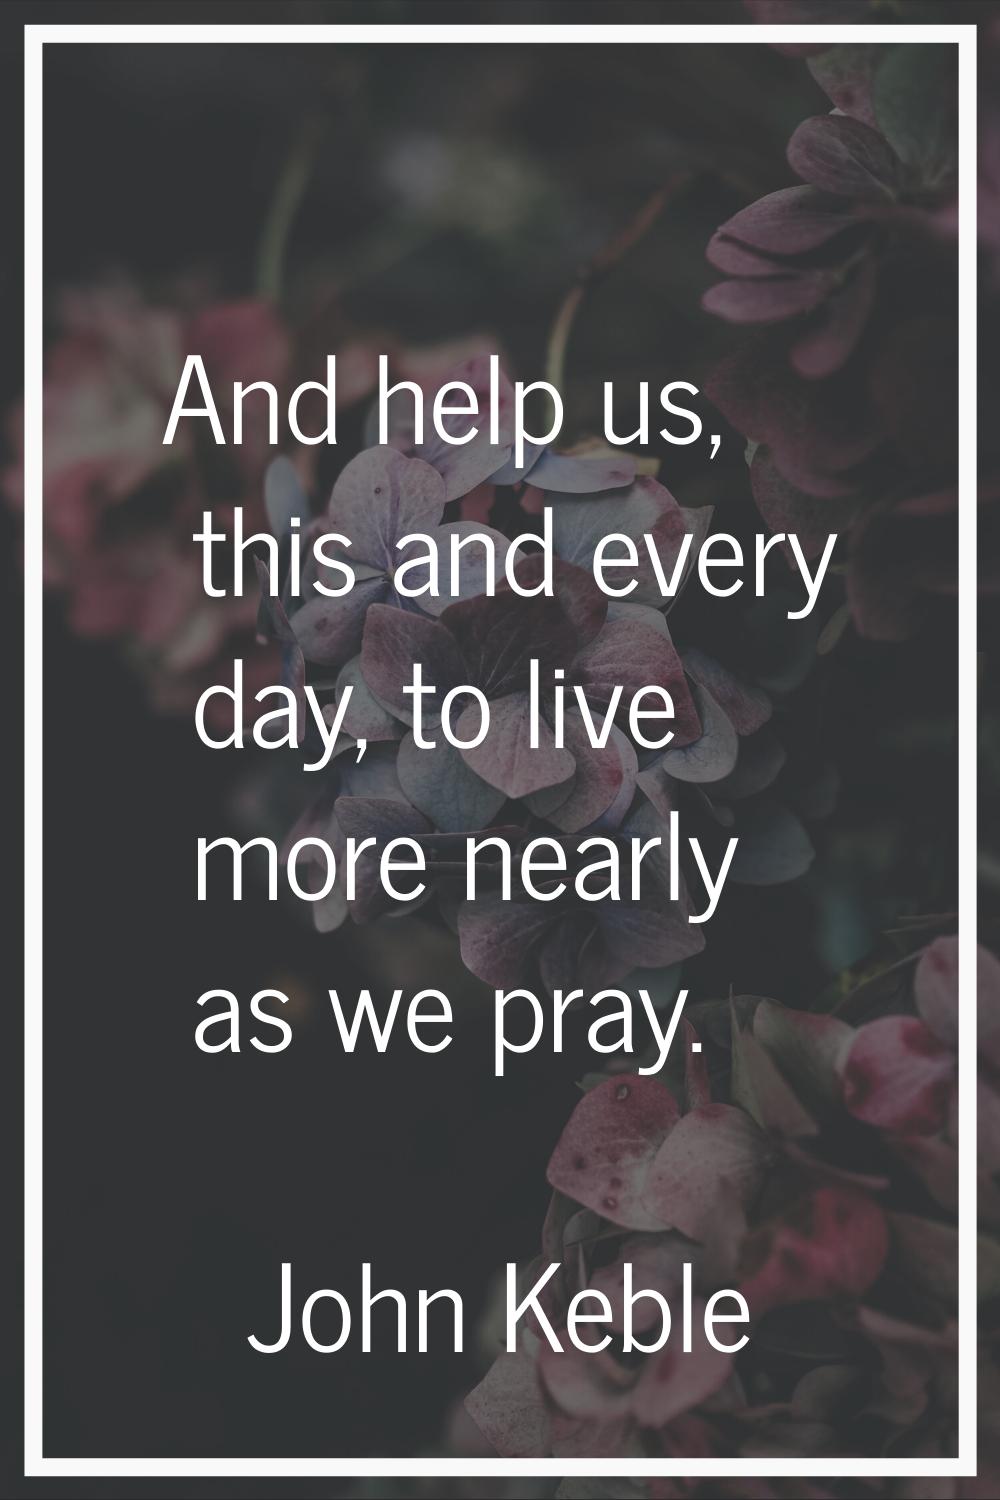 And help us, this and every day, to live more nearly as we pray.